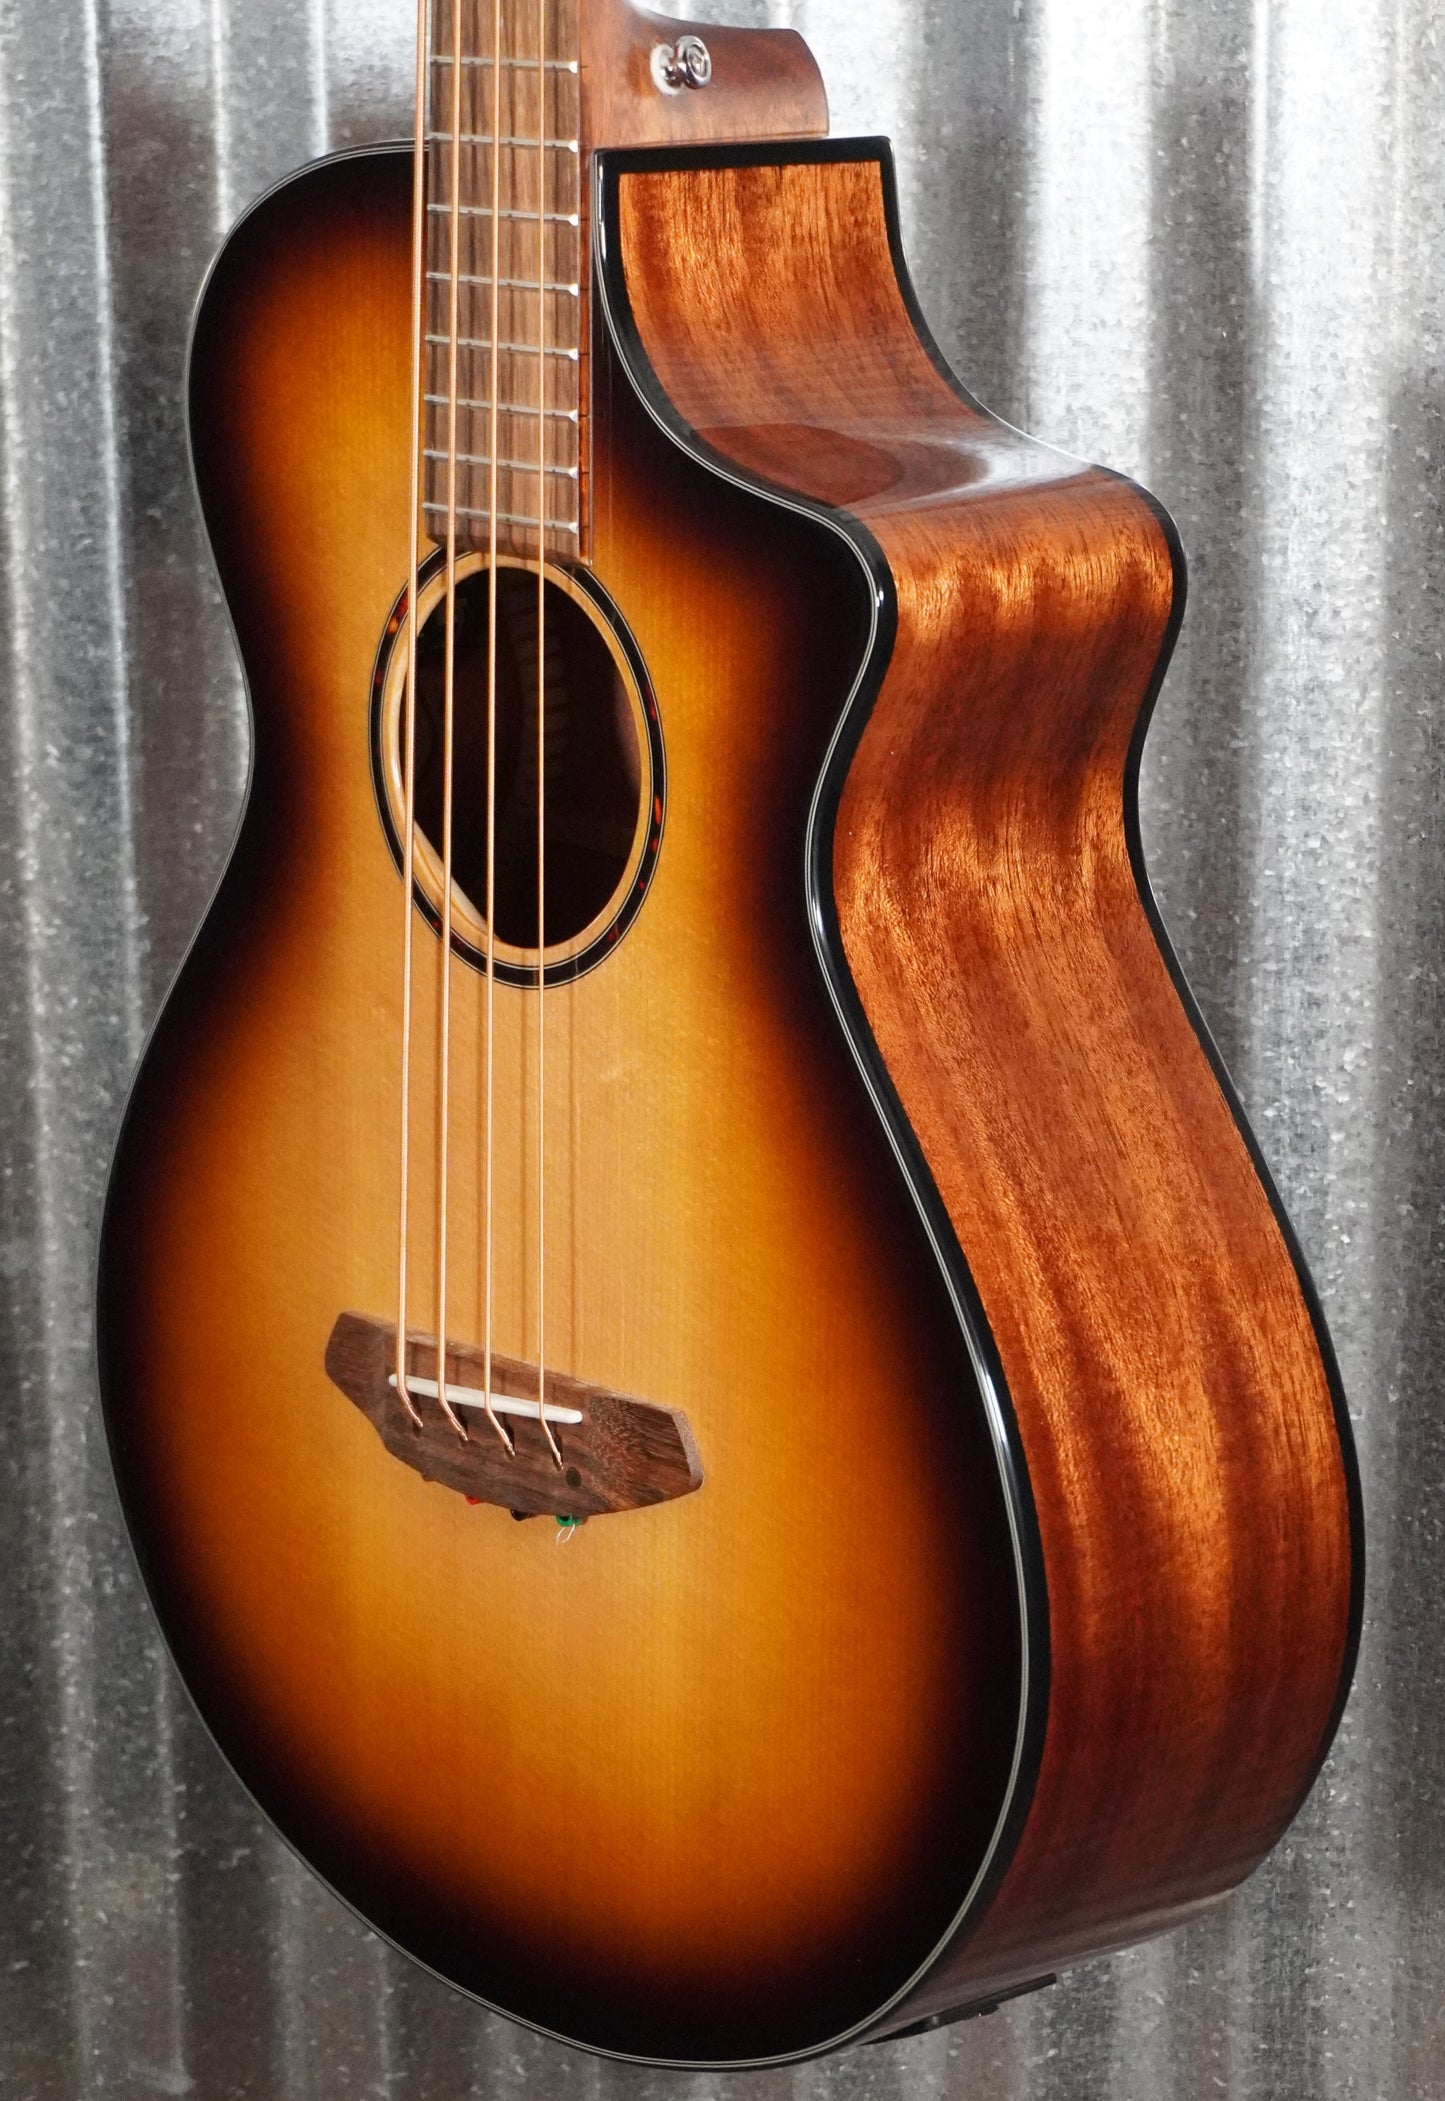 Breedlove Discovery S Concert Edgeburst Acoustic Electric Bass CE Sitka #2826